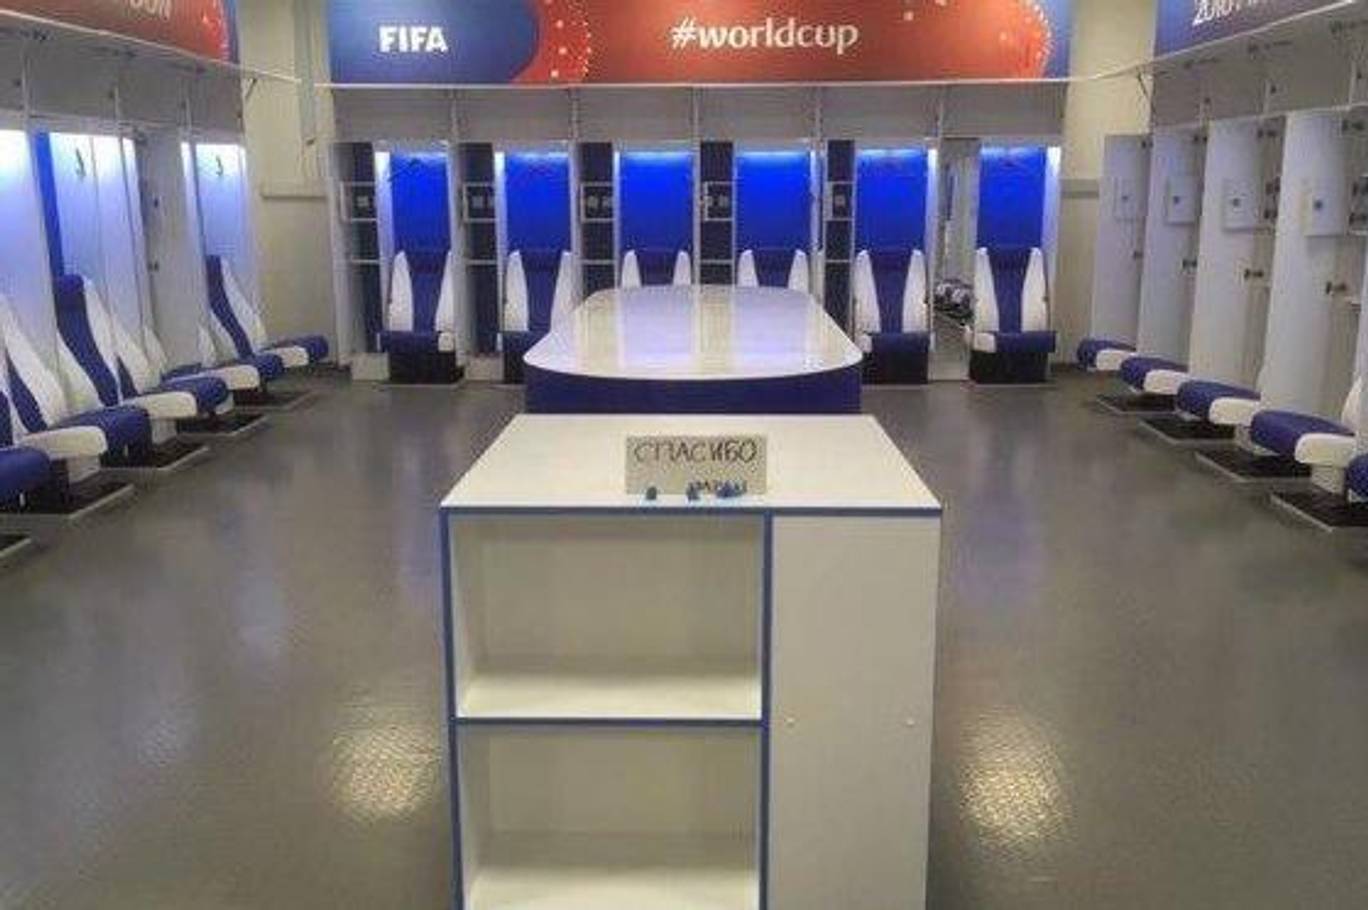 Japan team leave World Cup dressing room clean with ‘thank you’ note